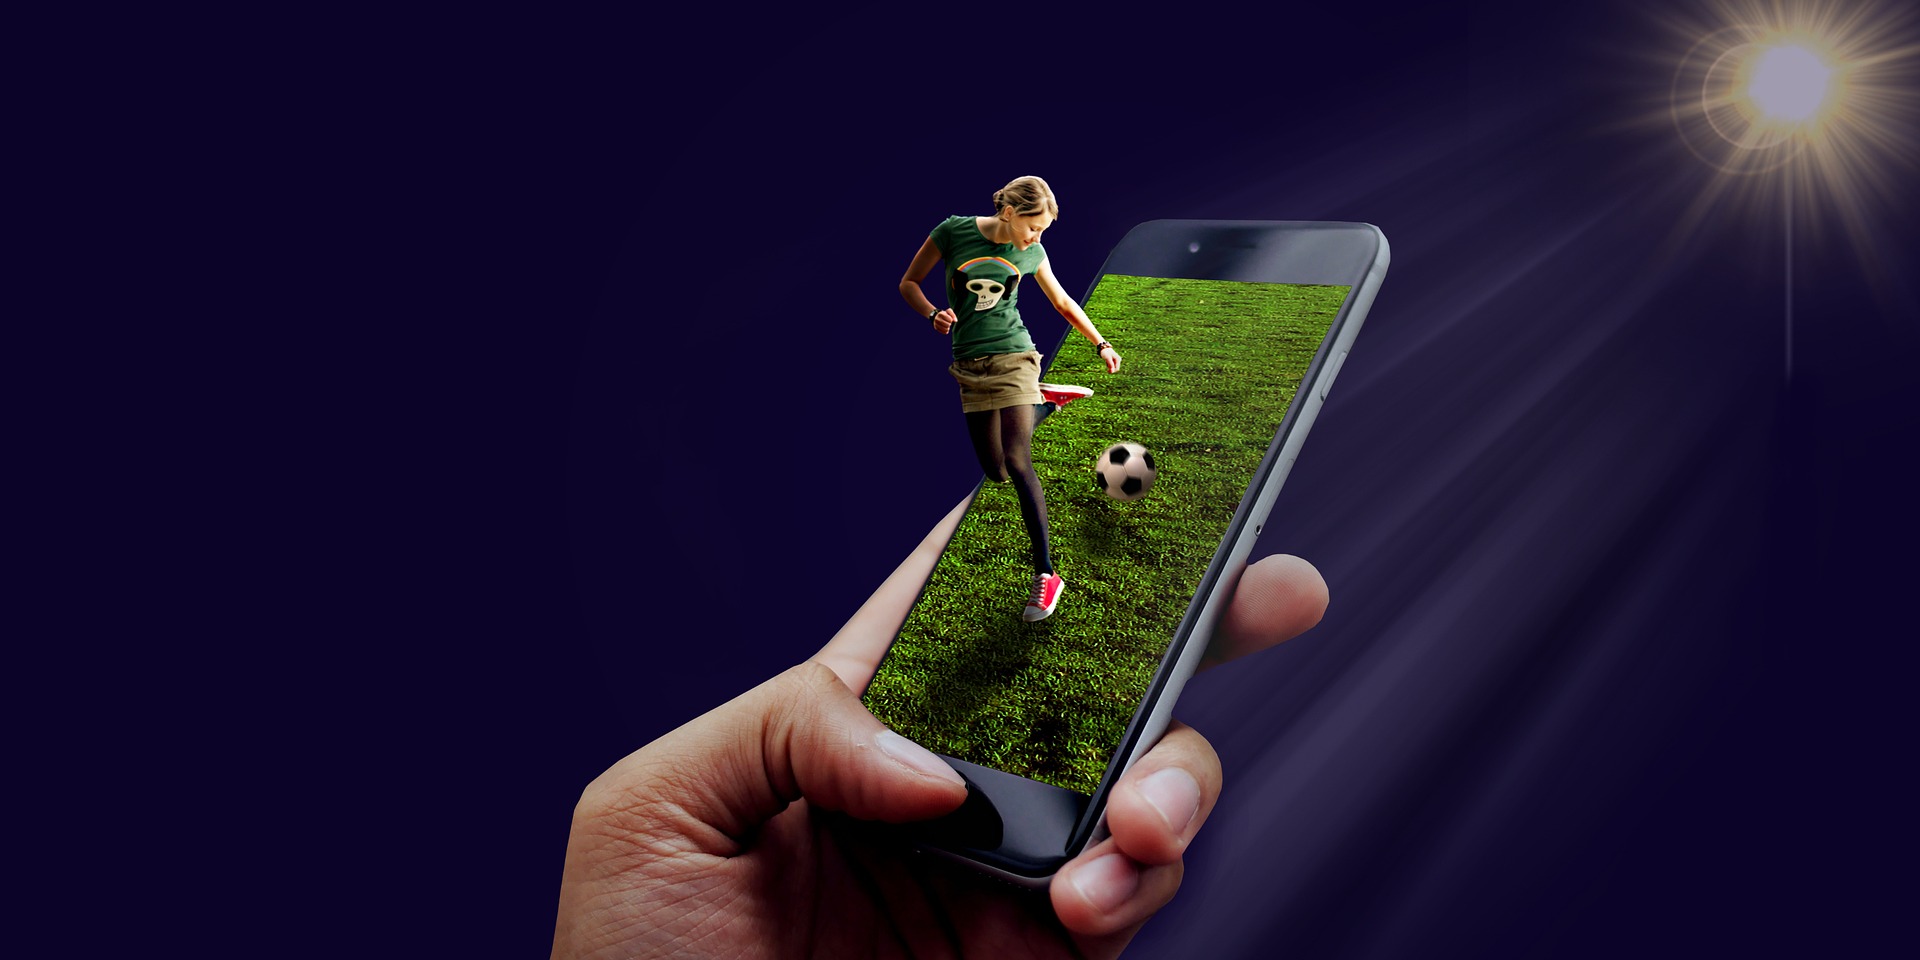 A phone with a female soccer player coming out of it.